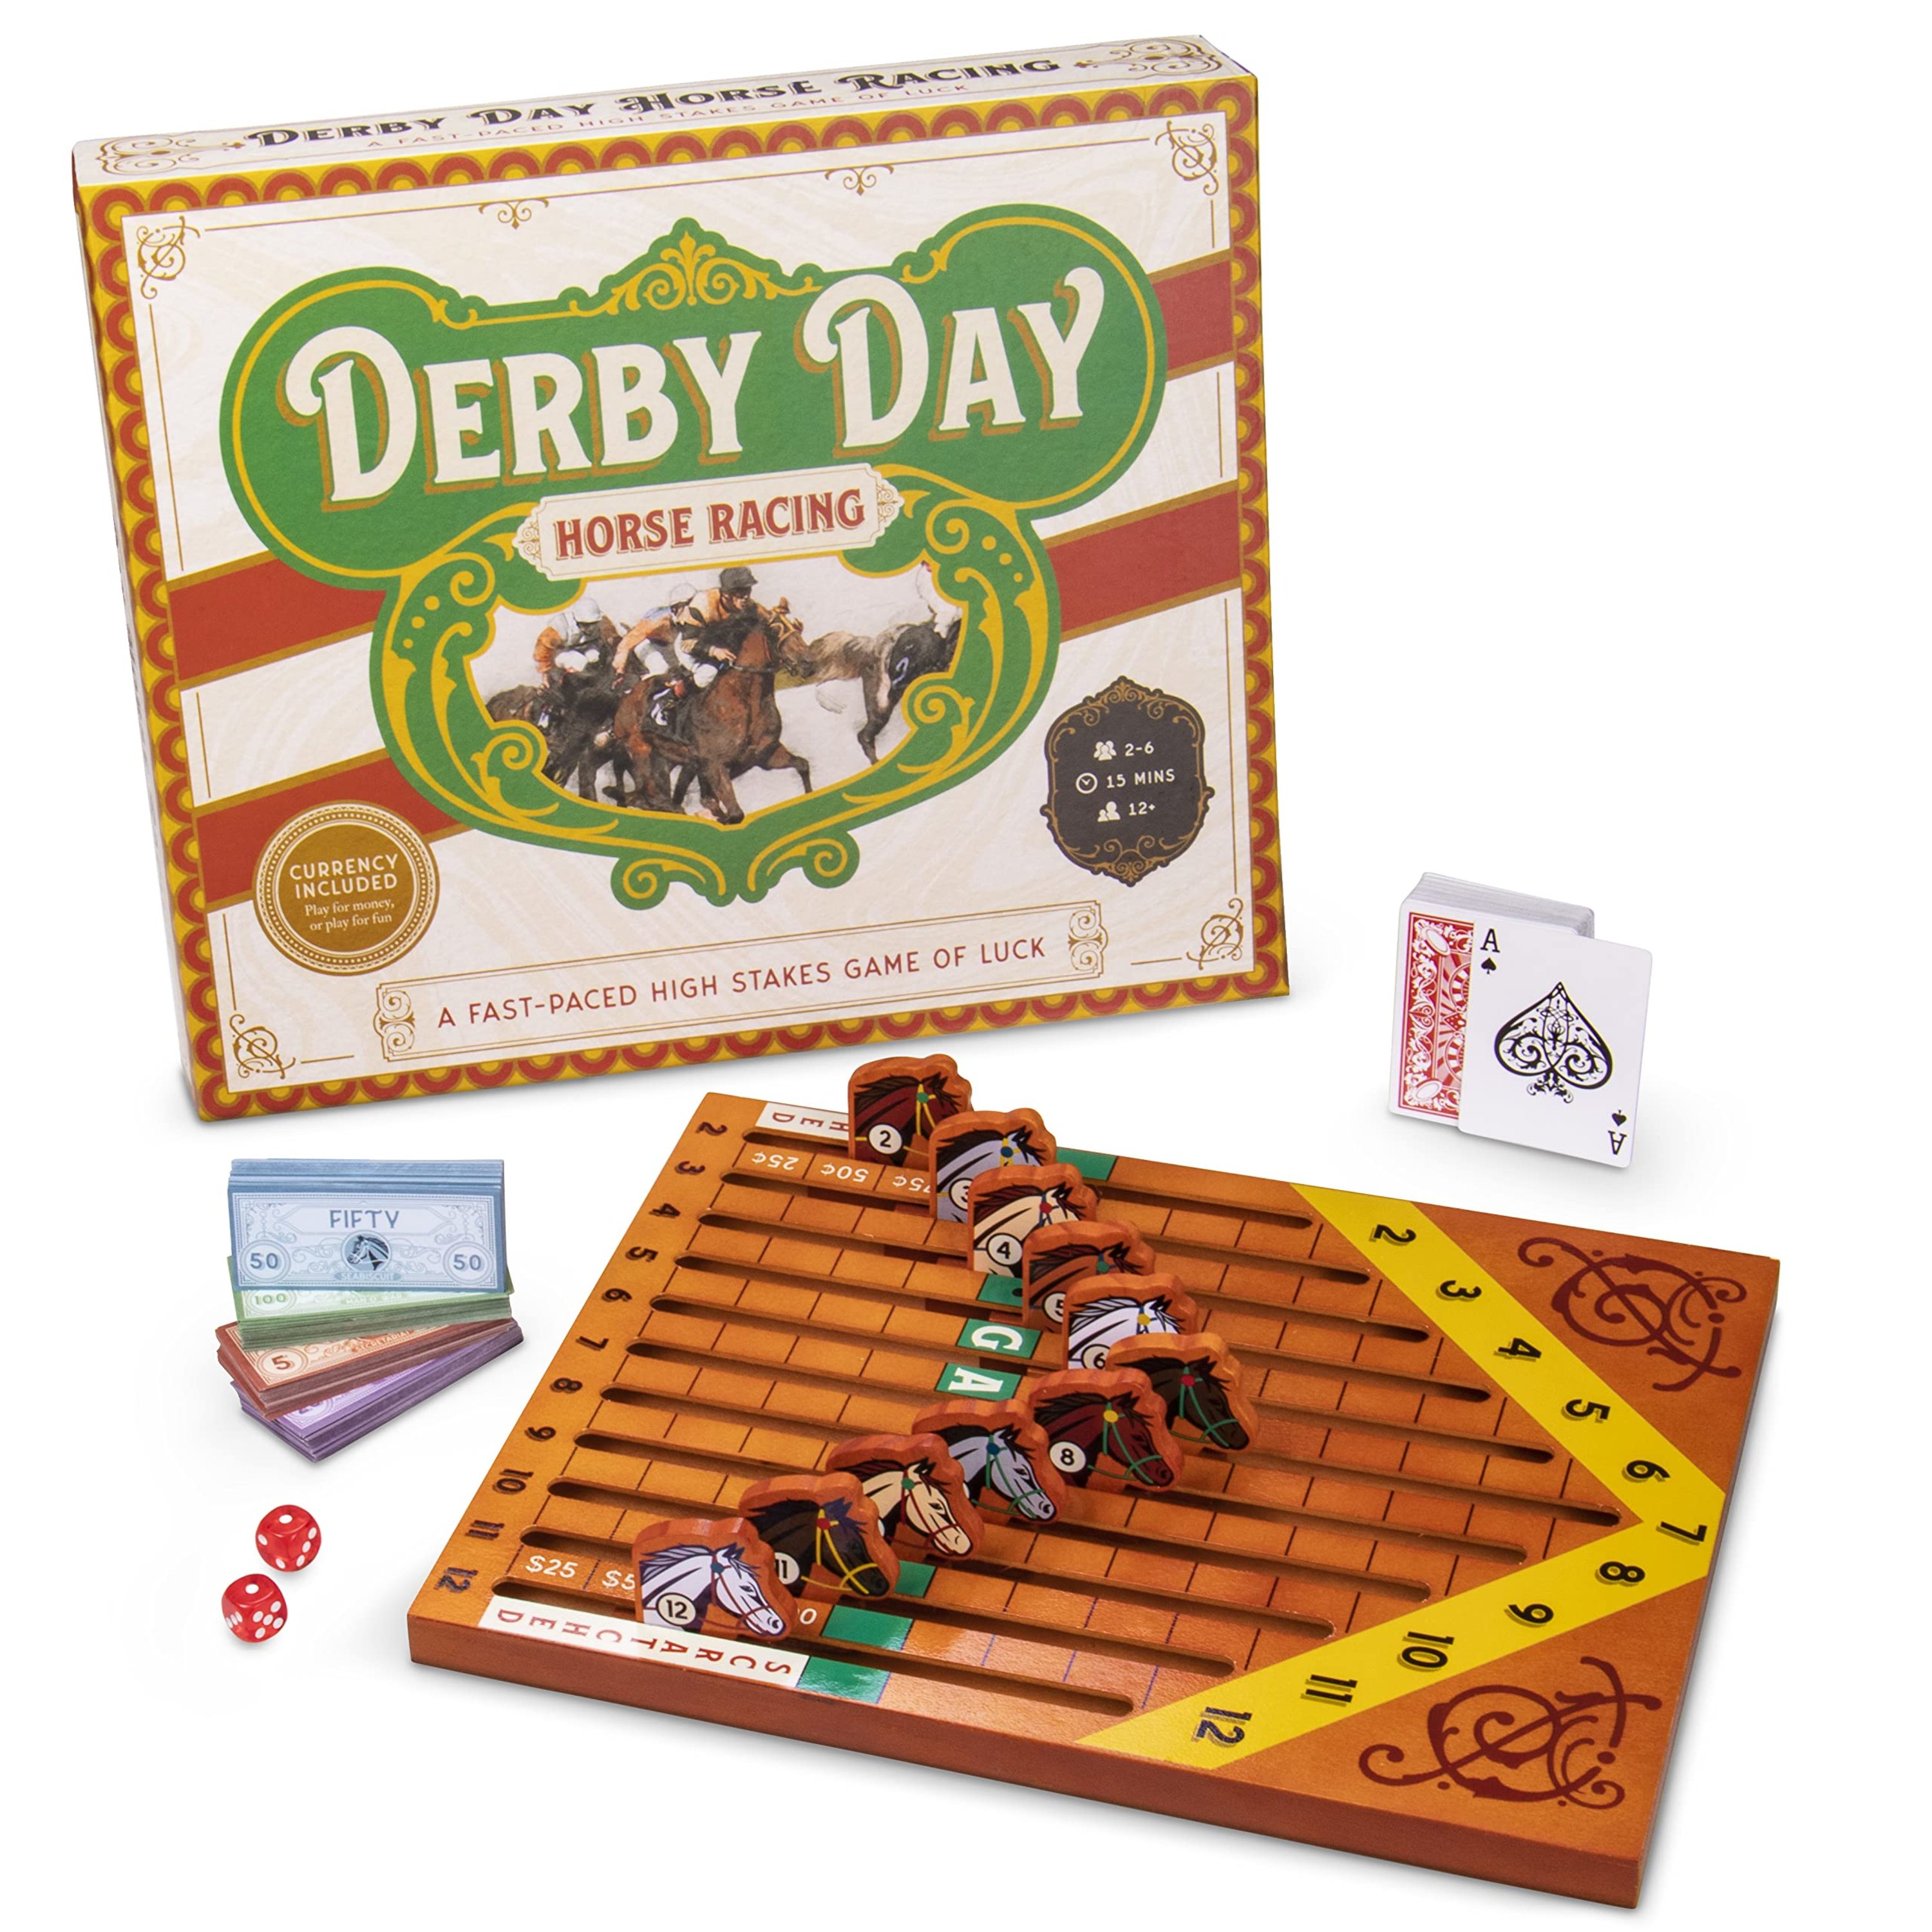 Derby Day Horse Racing Game - image 1 of 7